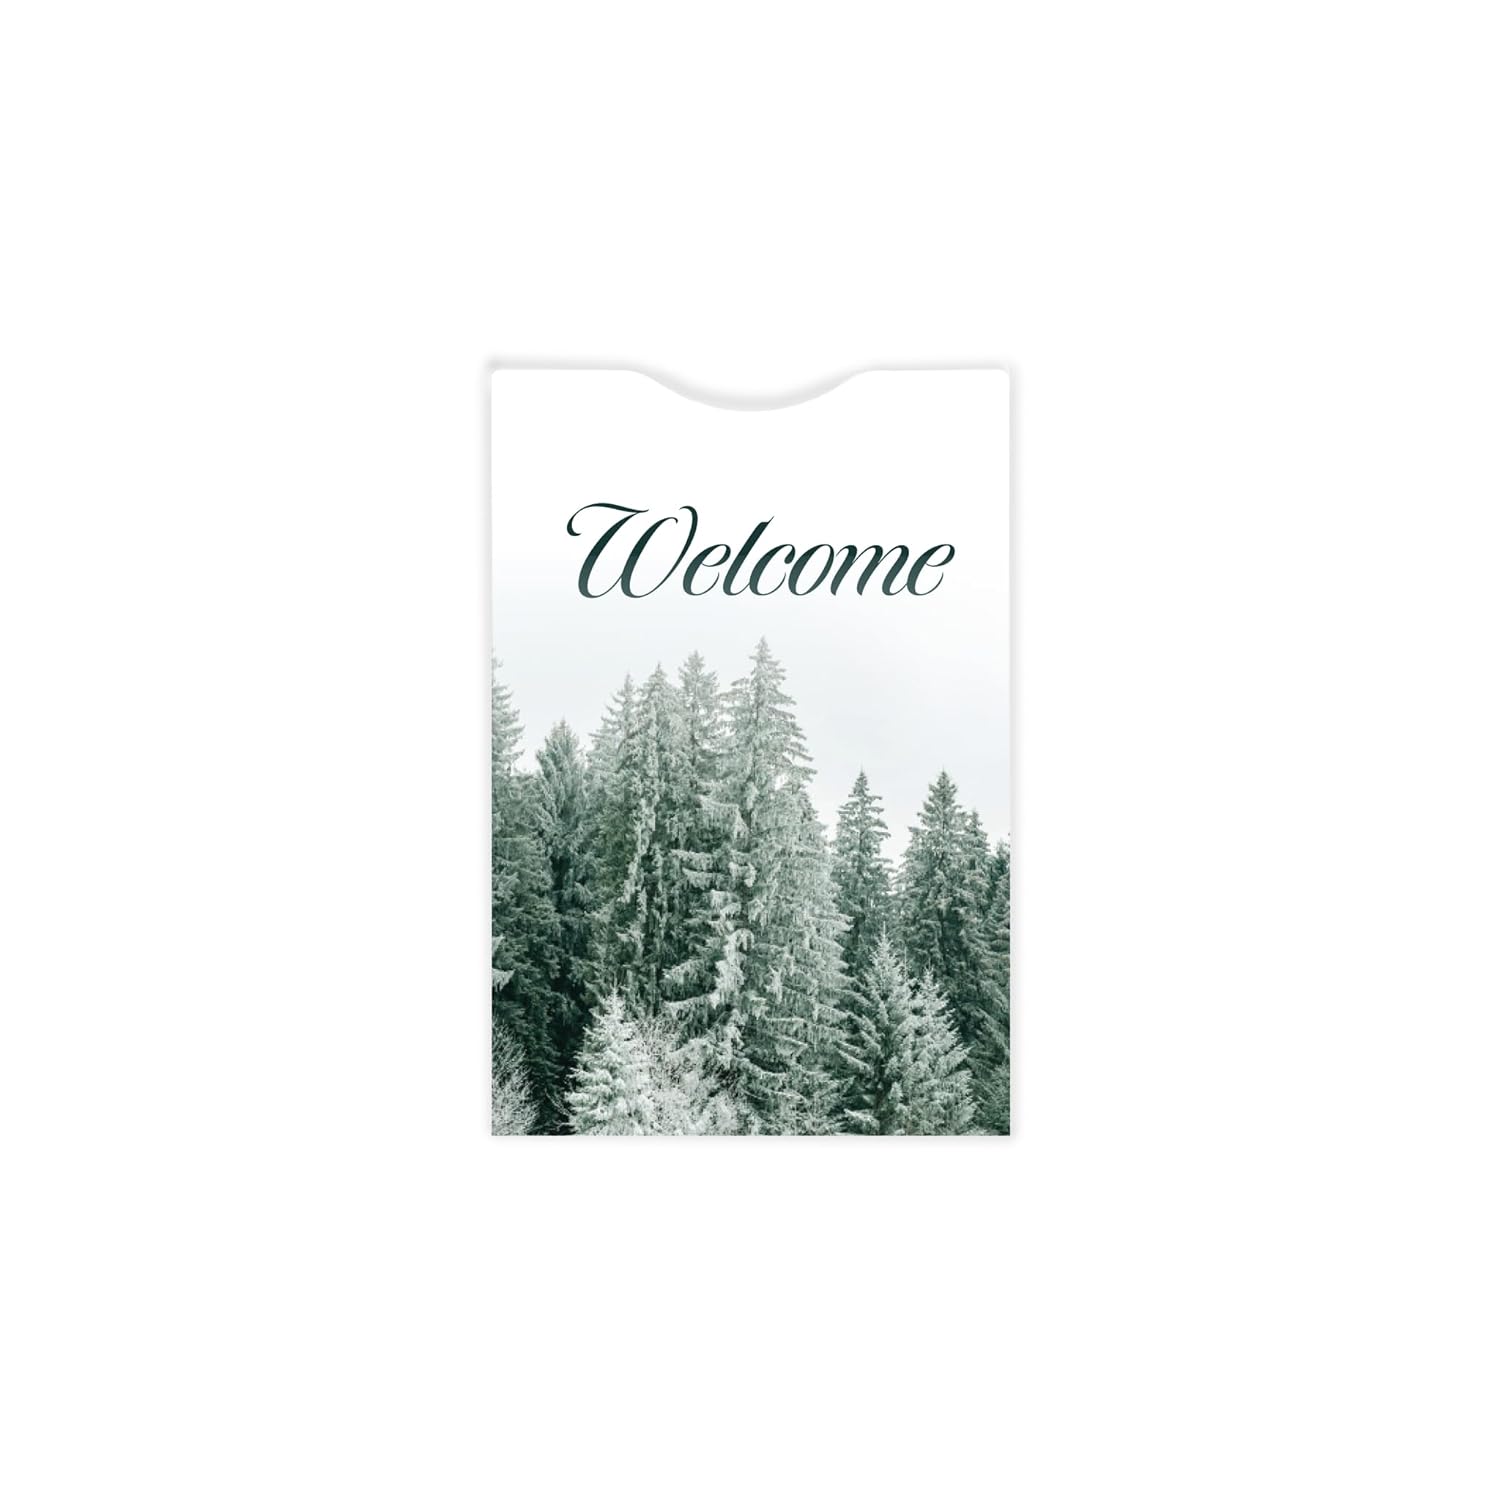 Thumb Cut Key Sleeves for Hotels and Motels with a Festive Holiday Design (Set of 1000)